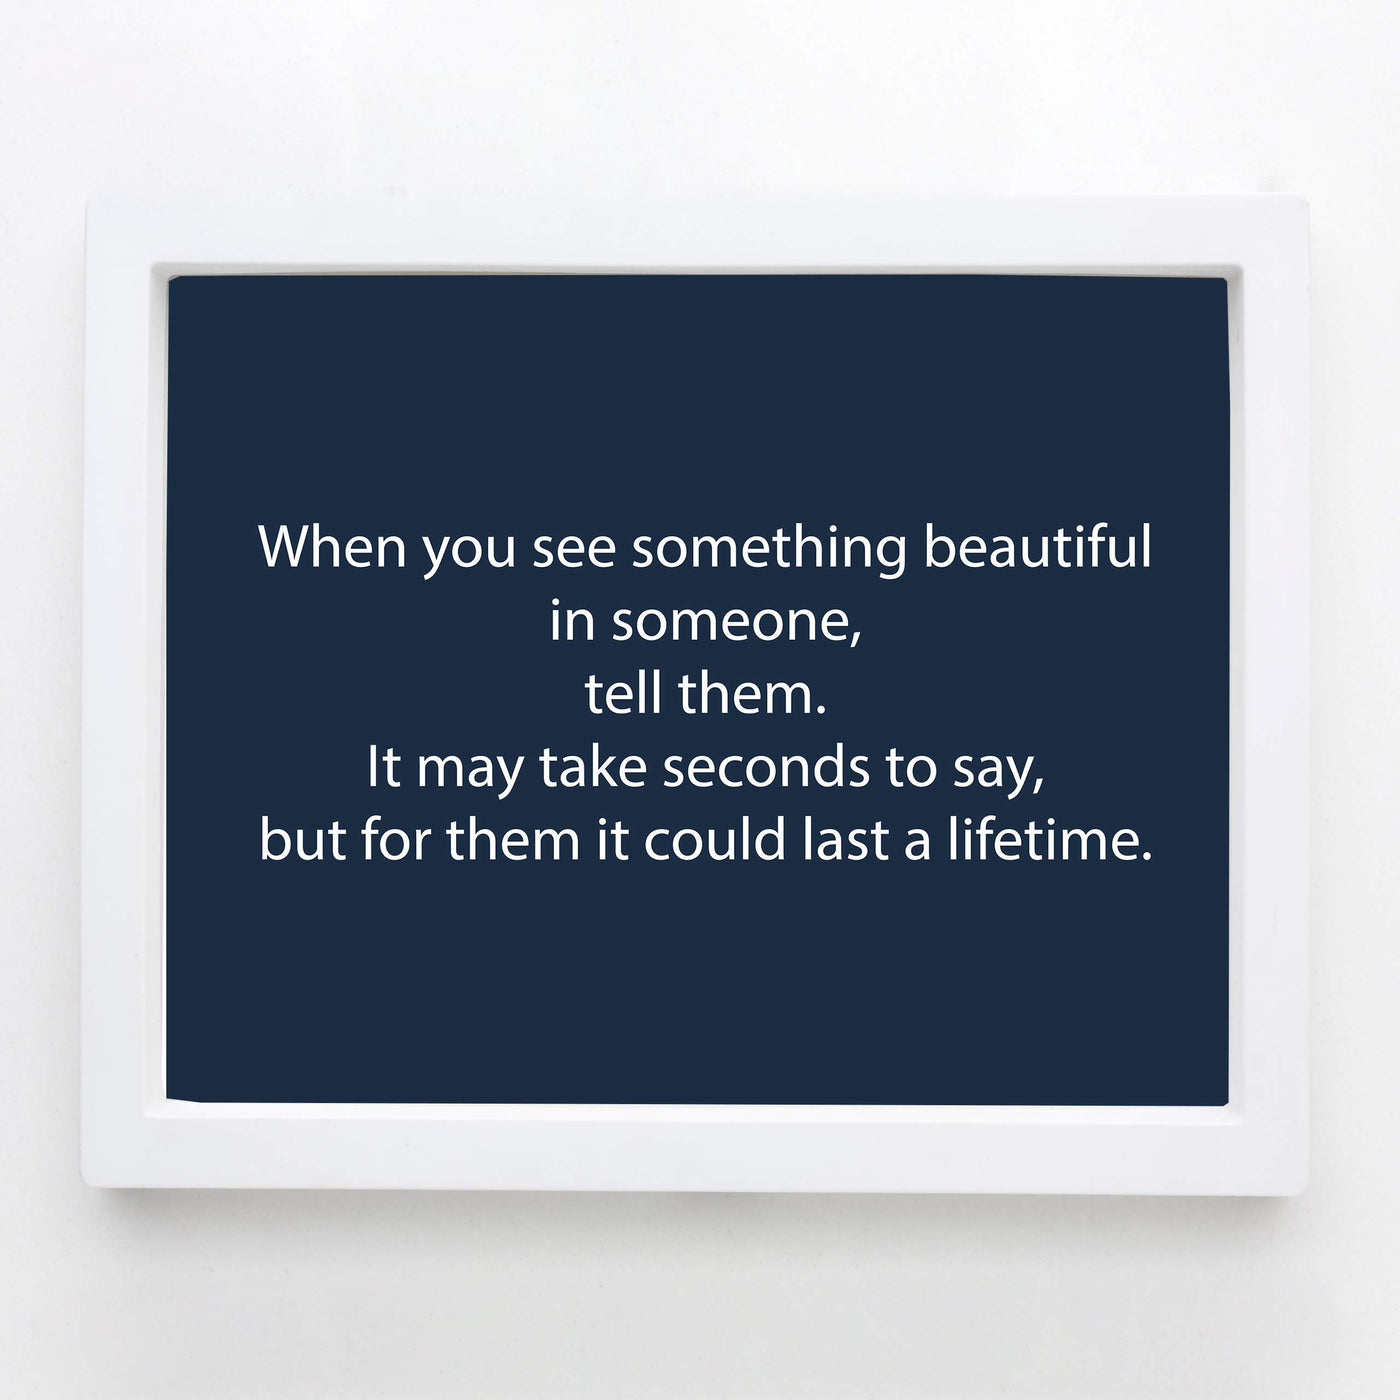 ?When You See Something Beautiful in Someone-Tell Them?-Inspirational Wall Art Sign -10 x 8" Modern Typographic Poster Print-Ready to Frame. Motivational Home-Office-Classroom Decor. Speak Kindness!